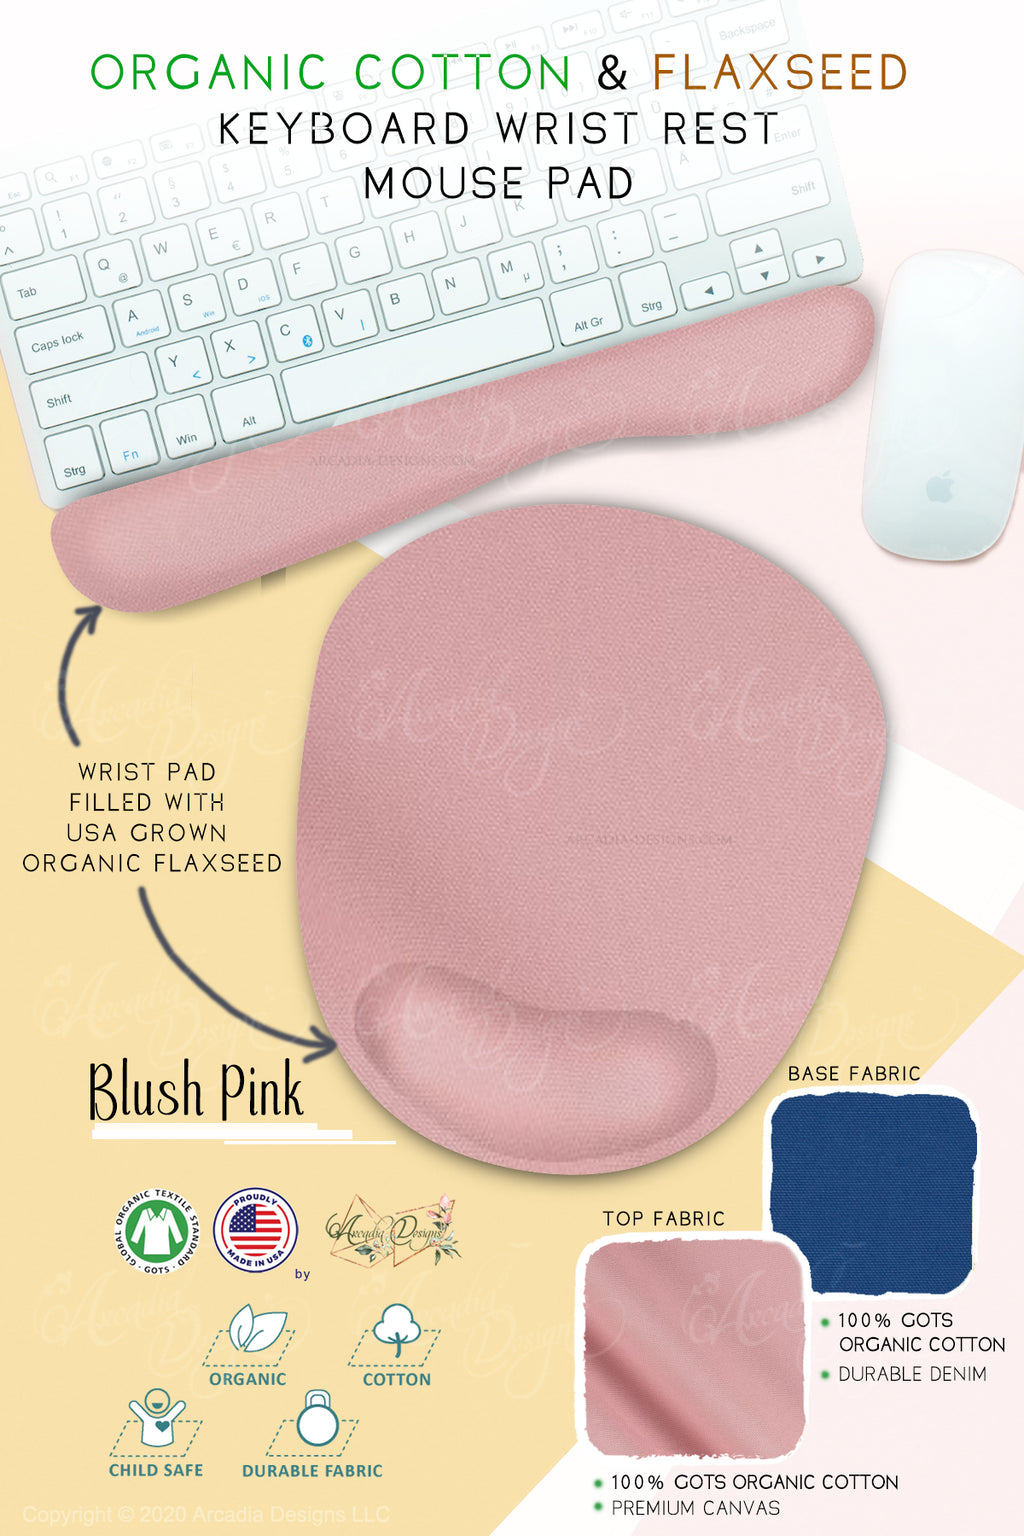 blush pink Organic Cotton & Flaxseed Keyboard rest and Mouse Pad hand made in USA exclusive by Arcadia Designs